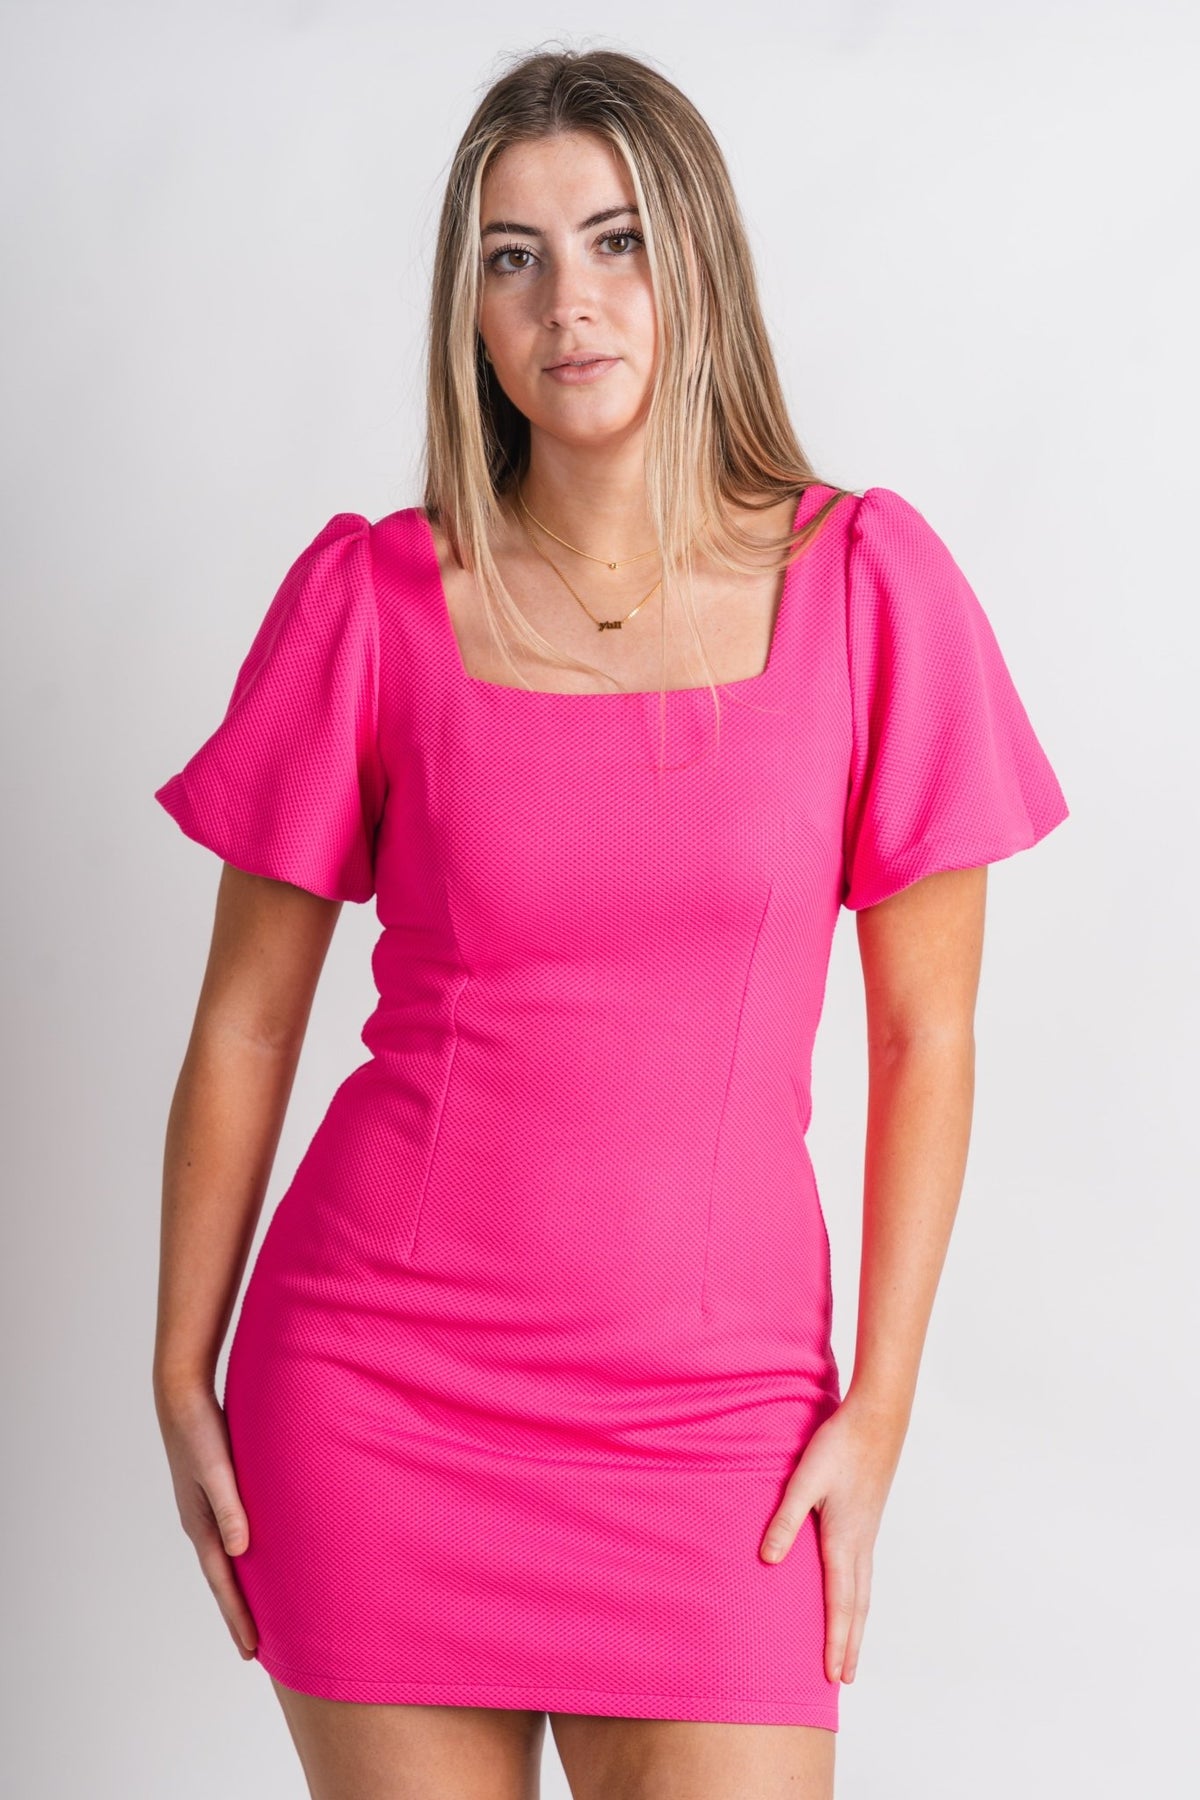 Puff sleeve hot pink mini dress - Trendy dress - Cute Vacation Collection at Lush Fashion Lounge Boutique in Oklahoma City